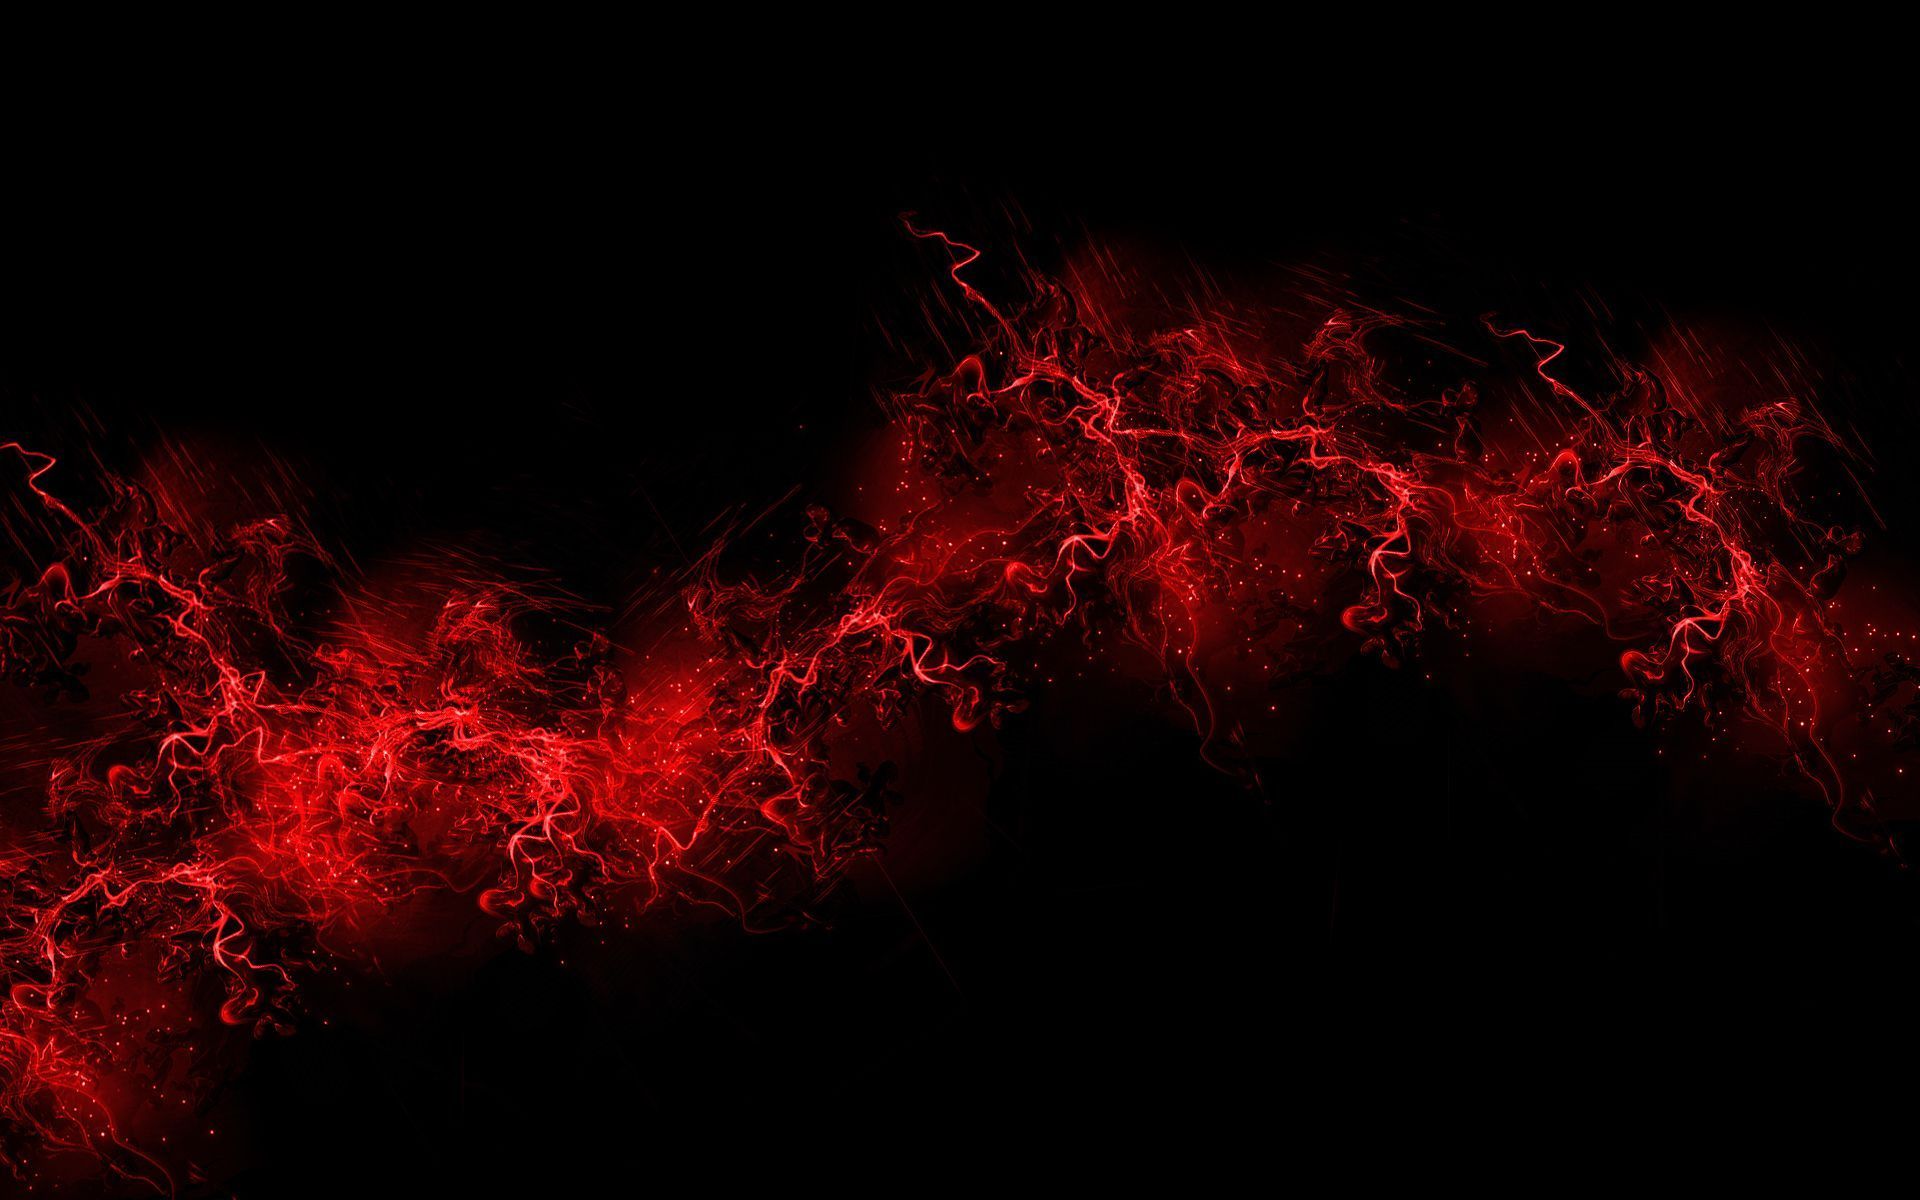 Black background free hd download Cool Red And Black Backgrounds